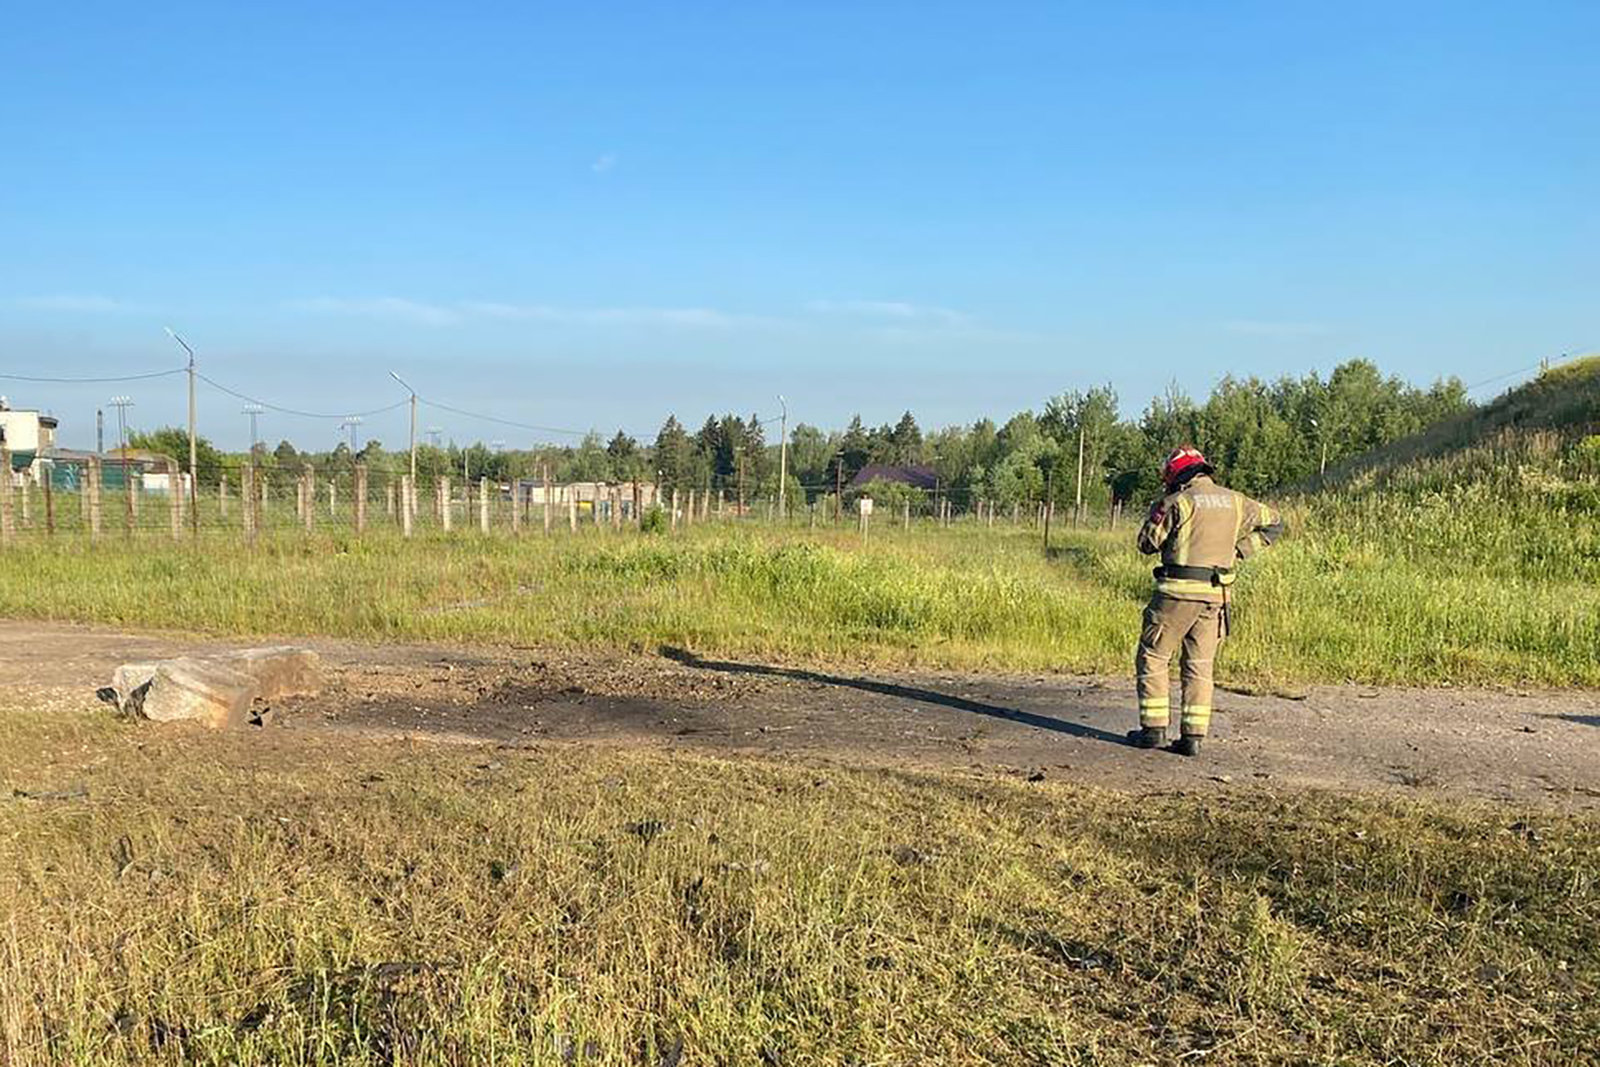 Two drones were taken out near a military base at Kalininets village, Naro-Fominskiy district, Russia, on June 21.